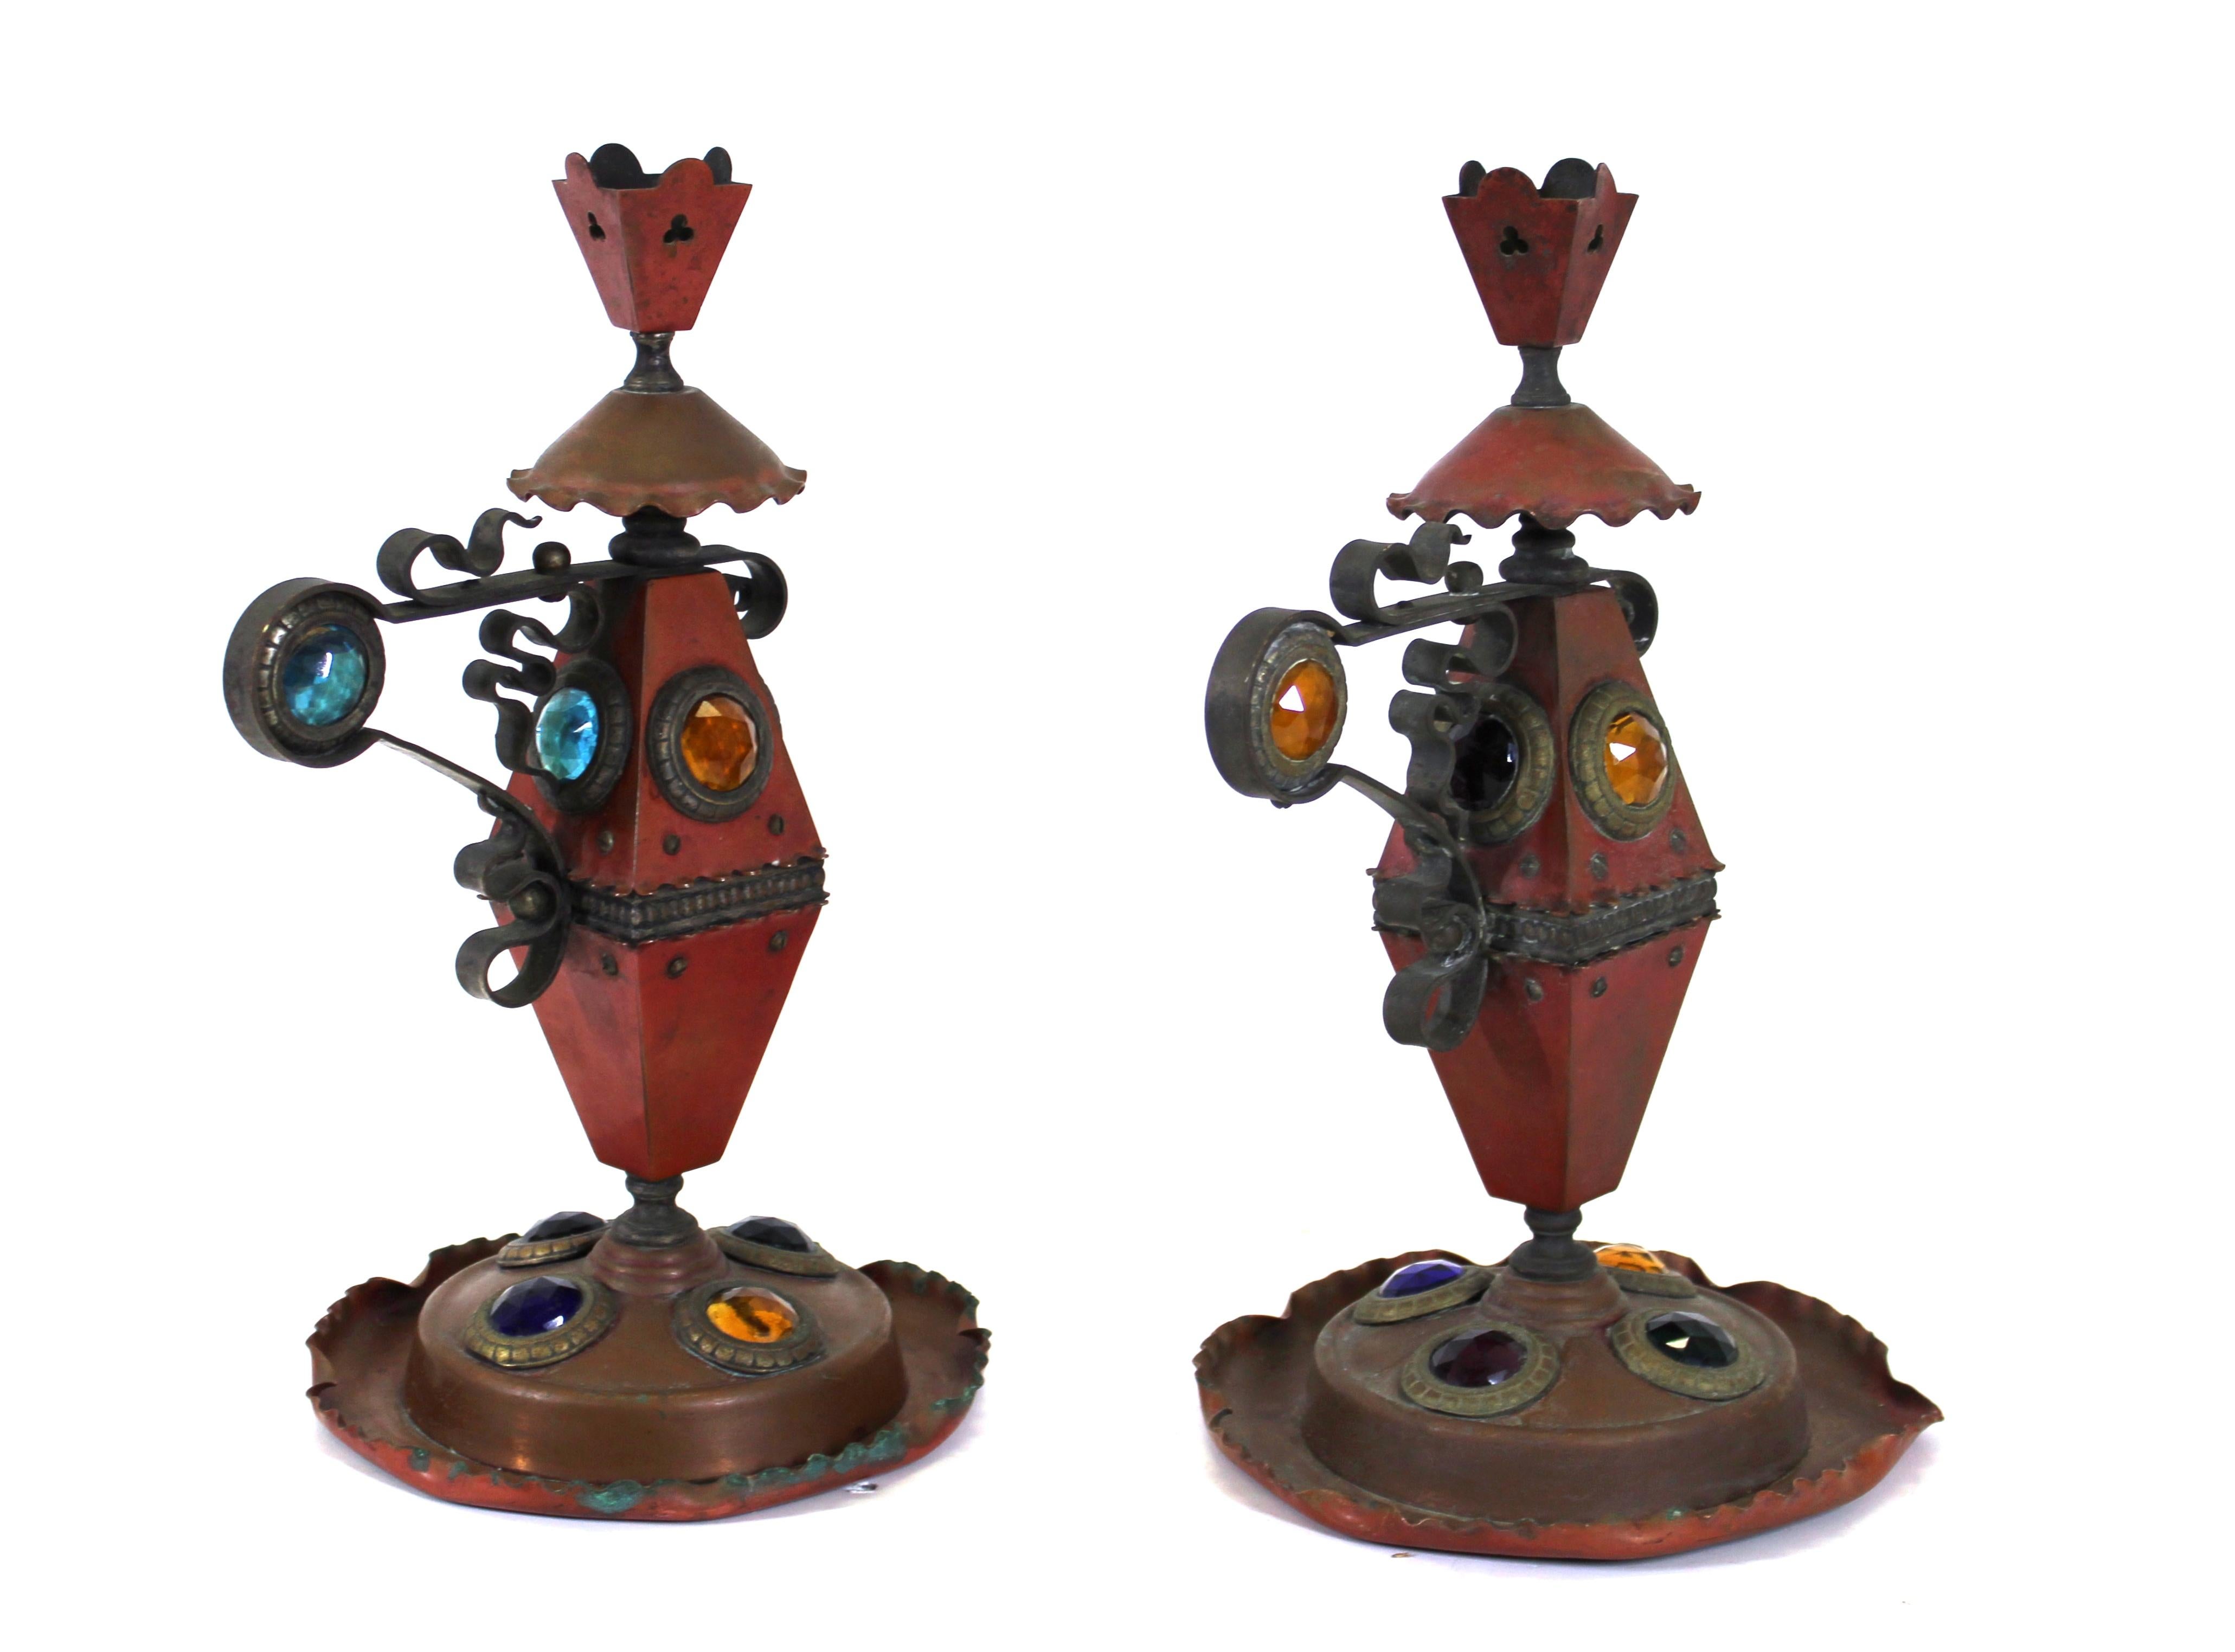 Bradley & Hubbard American Aesthetic Movement pair of handmade rare copper and iron candleholders with faceted glass jewel inserts and original red patina in the style of Tiffany & Co. Made in the United States during the 1870s, this pair is in